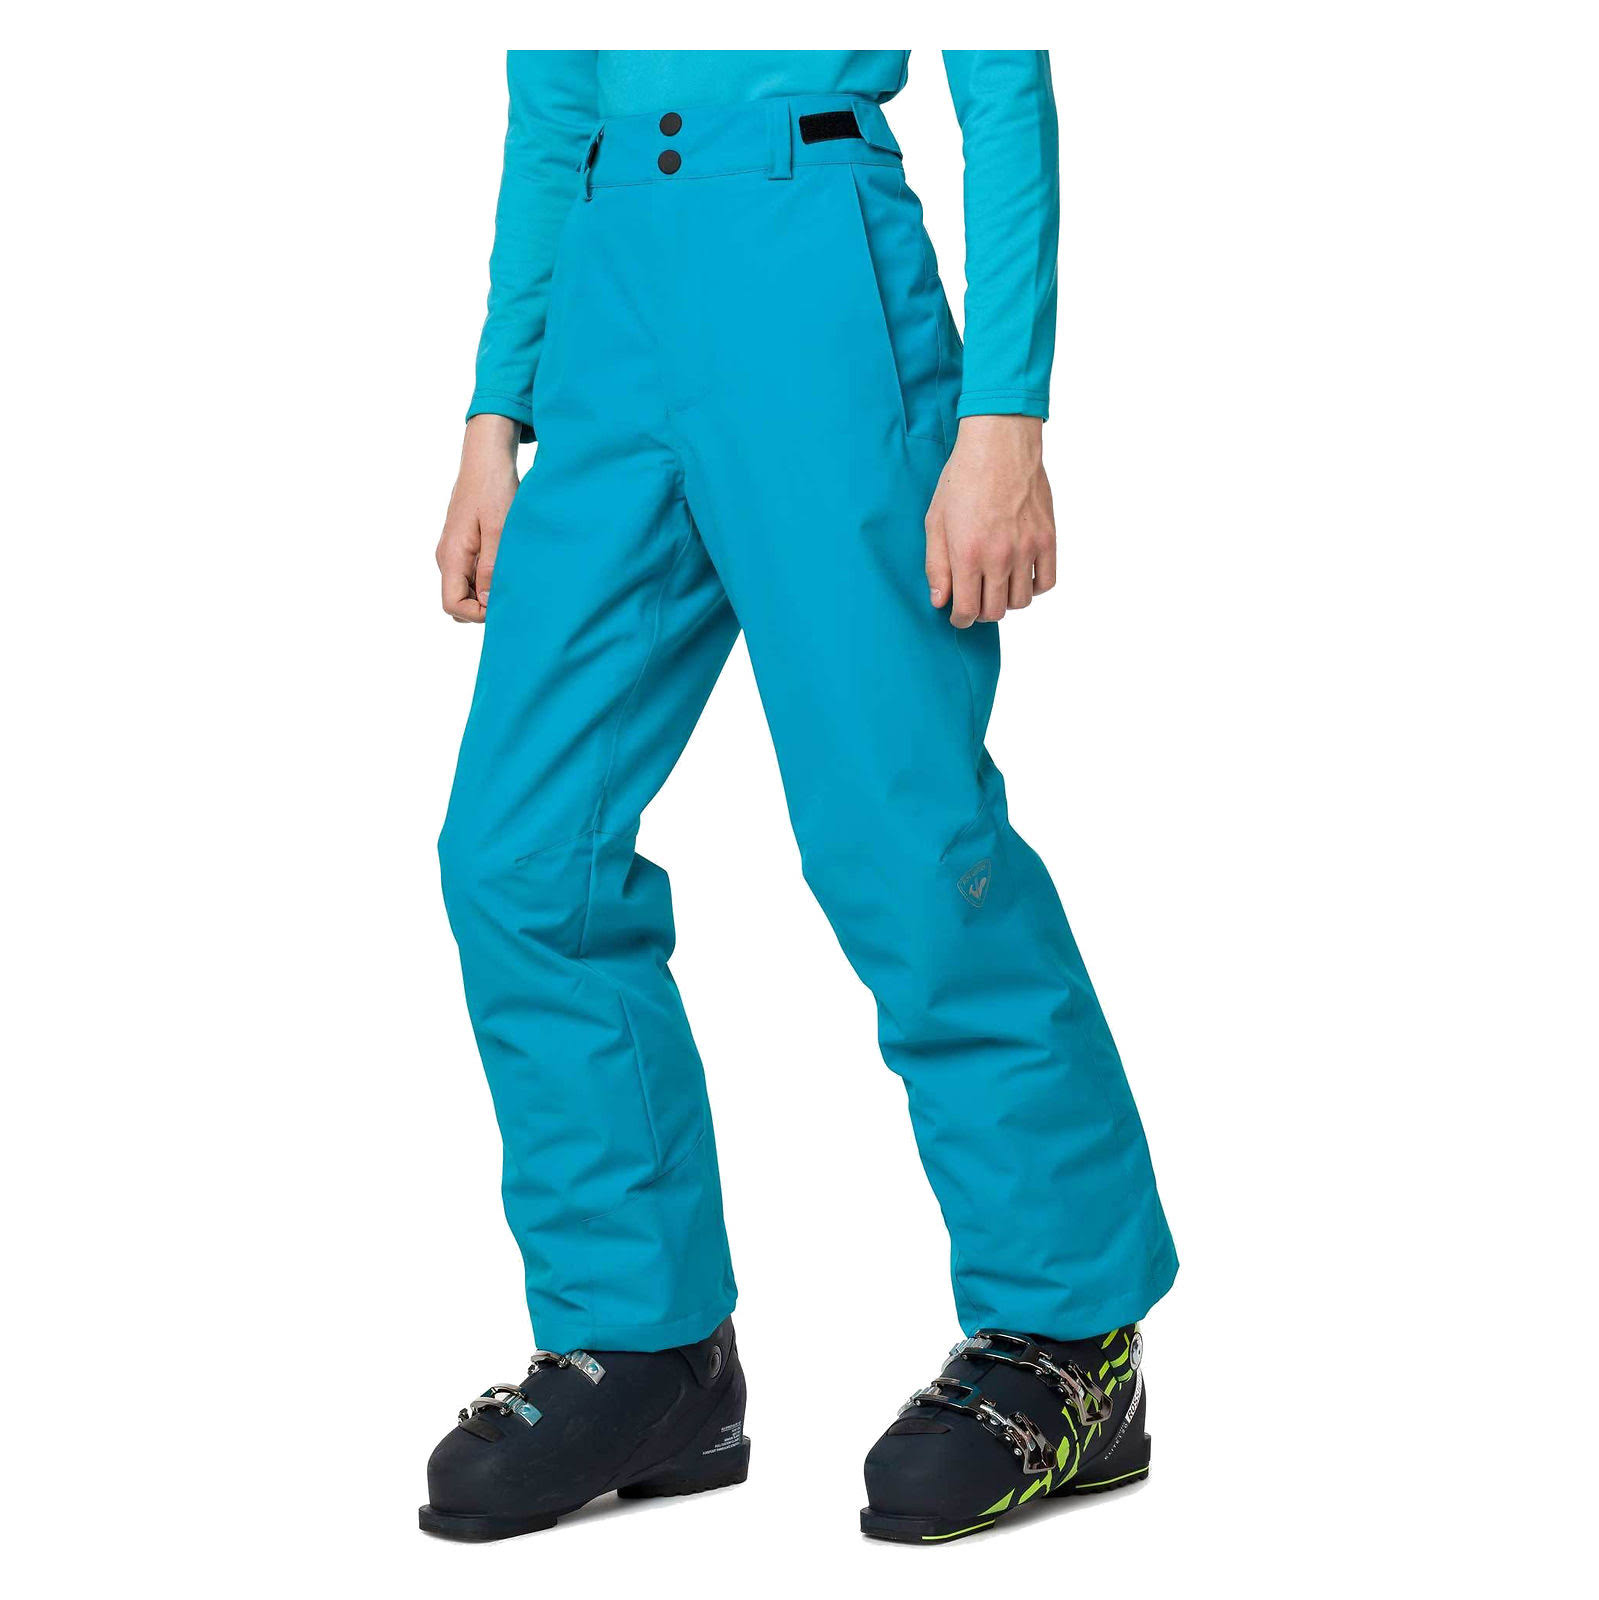 Rossignol Ski Trousers Turquoise Blue Girls - 16